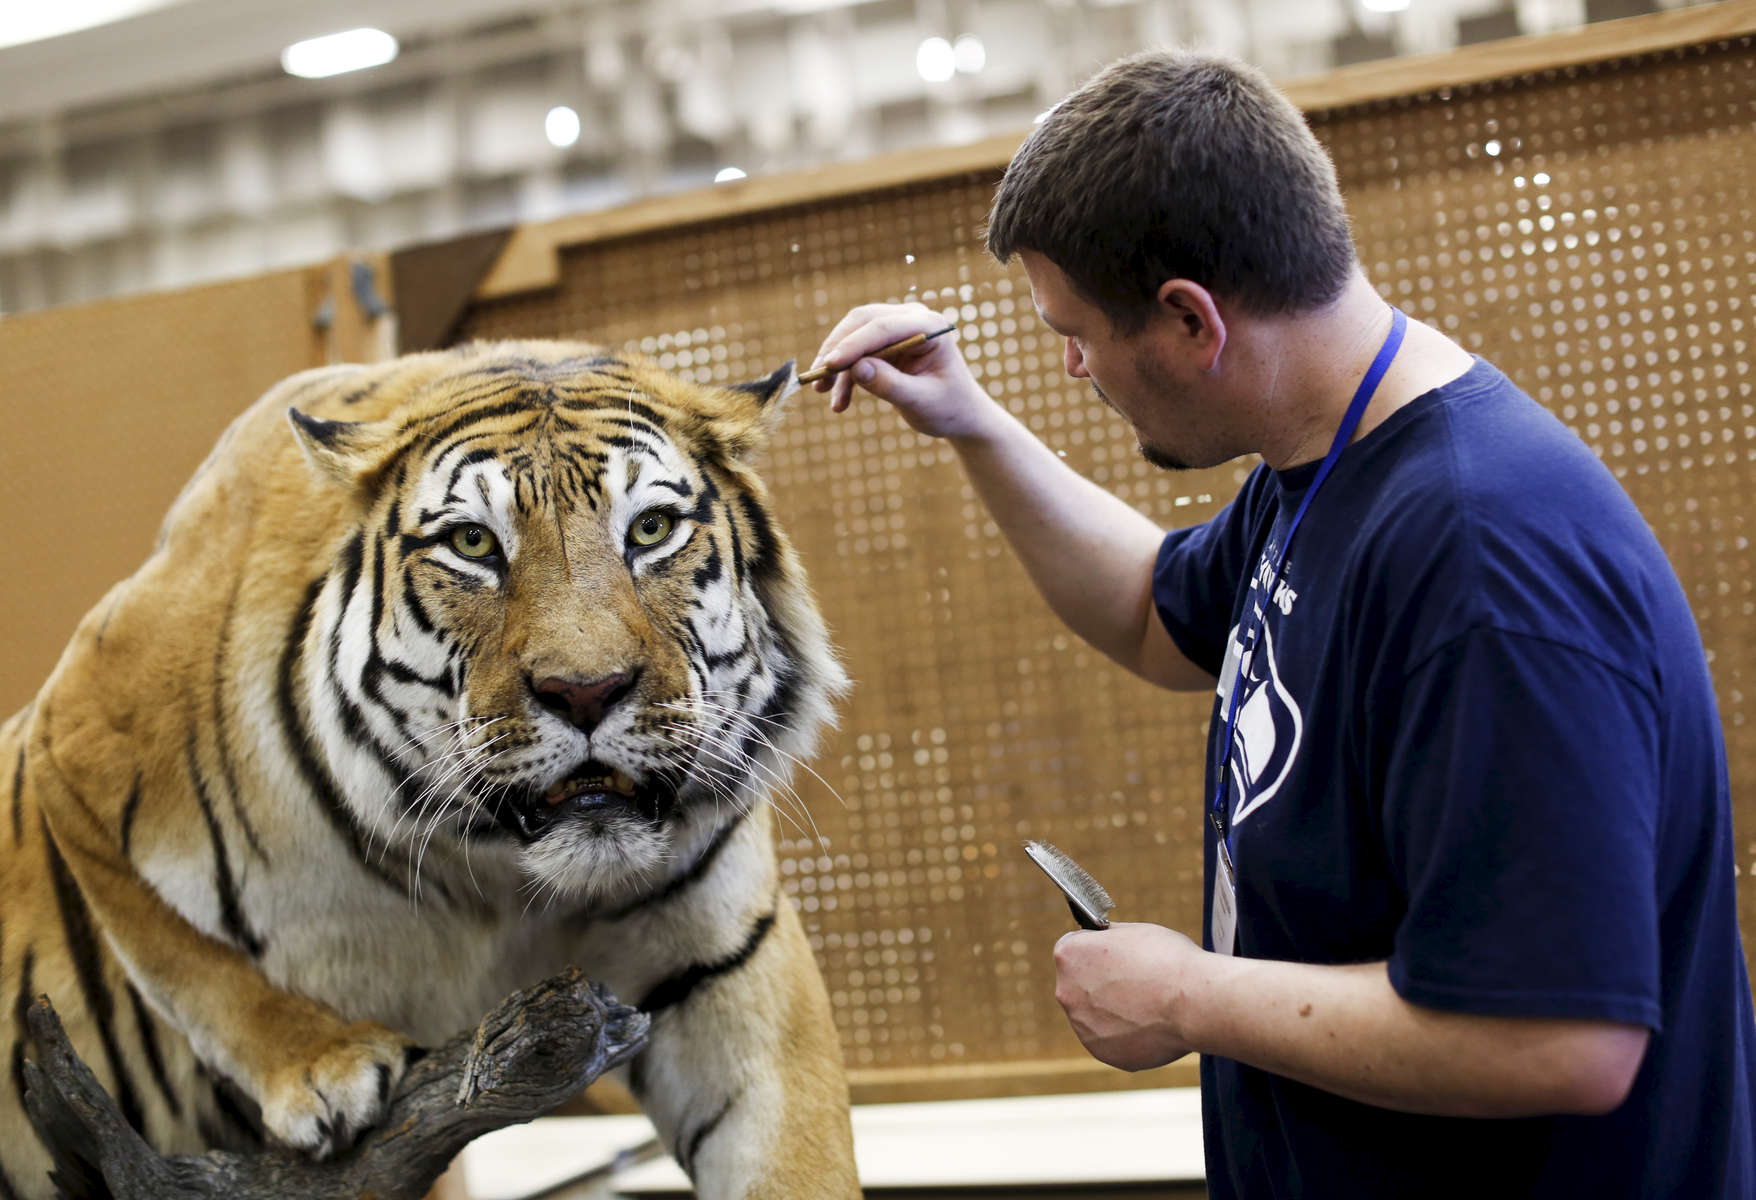 A participant prepares an entry before the beginning of the World Taxidermy & Fish Carving Championships, at the Springfield Expo Center, in Springfield, Missouri on May 1, 2019.